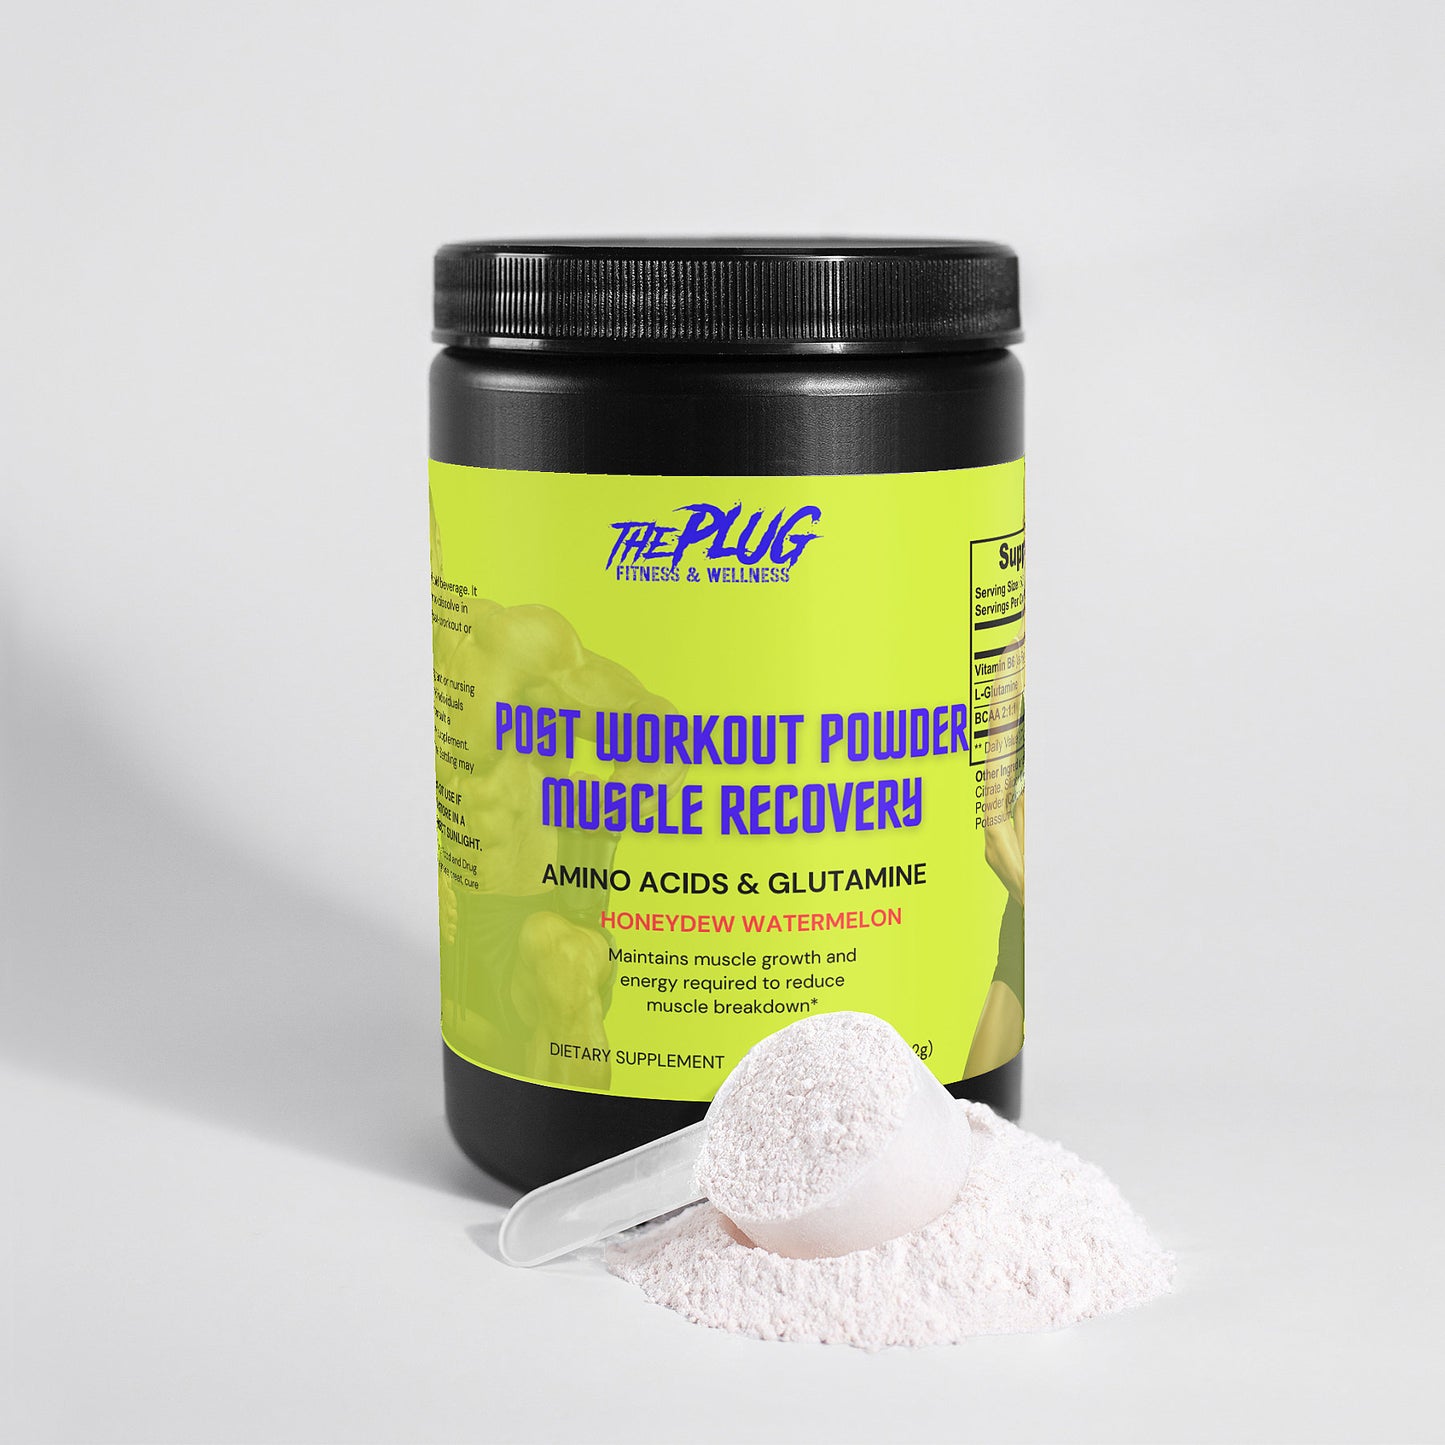 Post Workout Powder MUSCLE RECOVERY(AMINO ACIDS & GLUTAMINE)